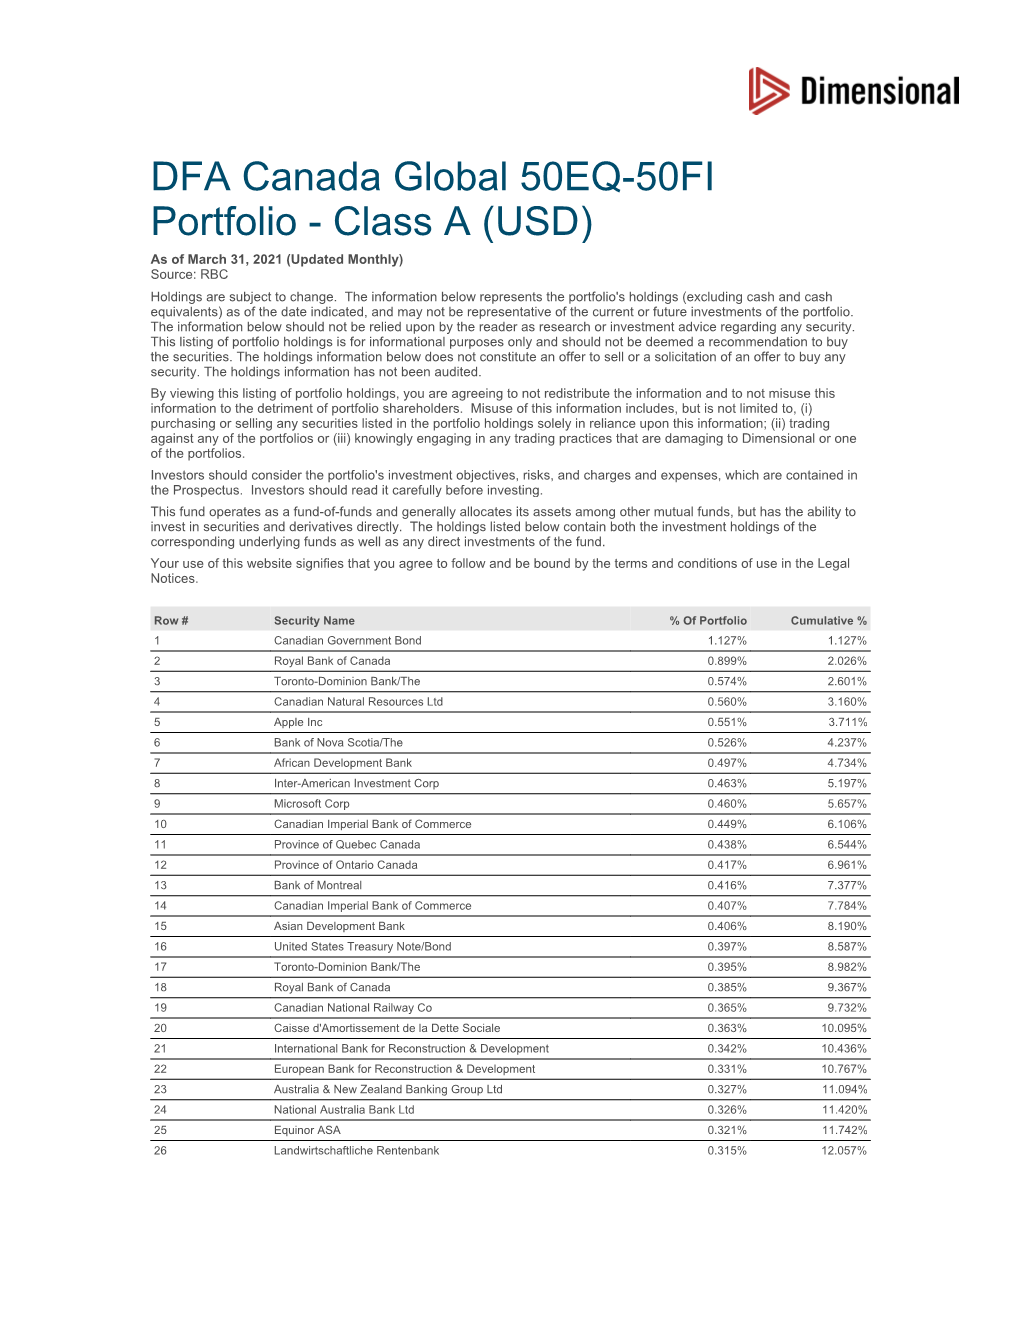 DFA Canada Global 50EQ-50FI Portfolio - Class a (USD) As of March 31, 2021 (Updated Monthly) Source: RBC Holdings Are Subject to Change